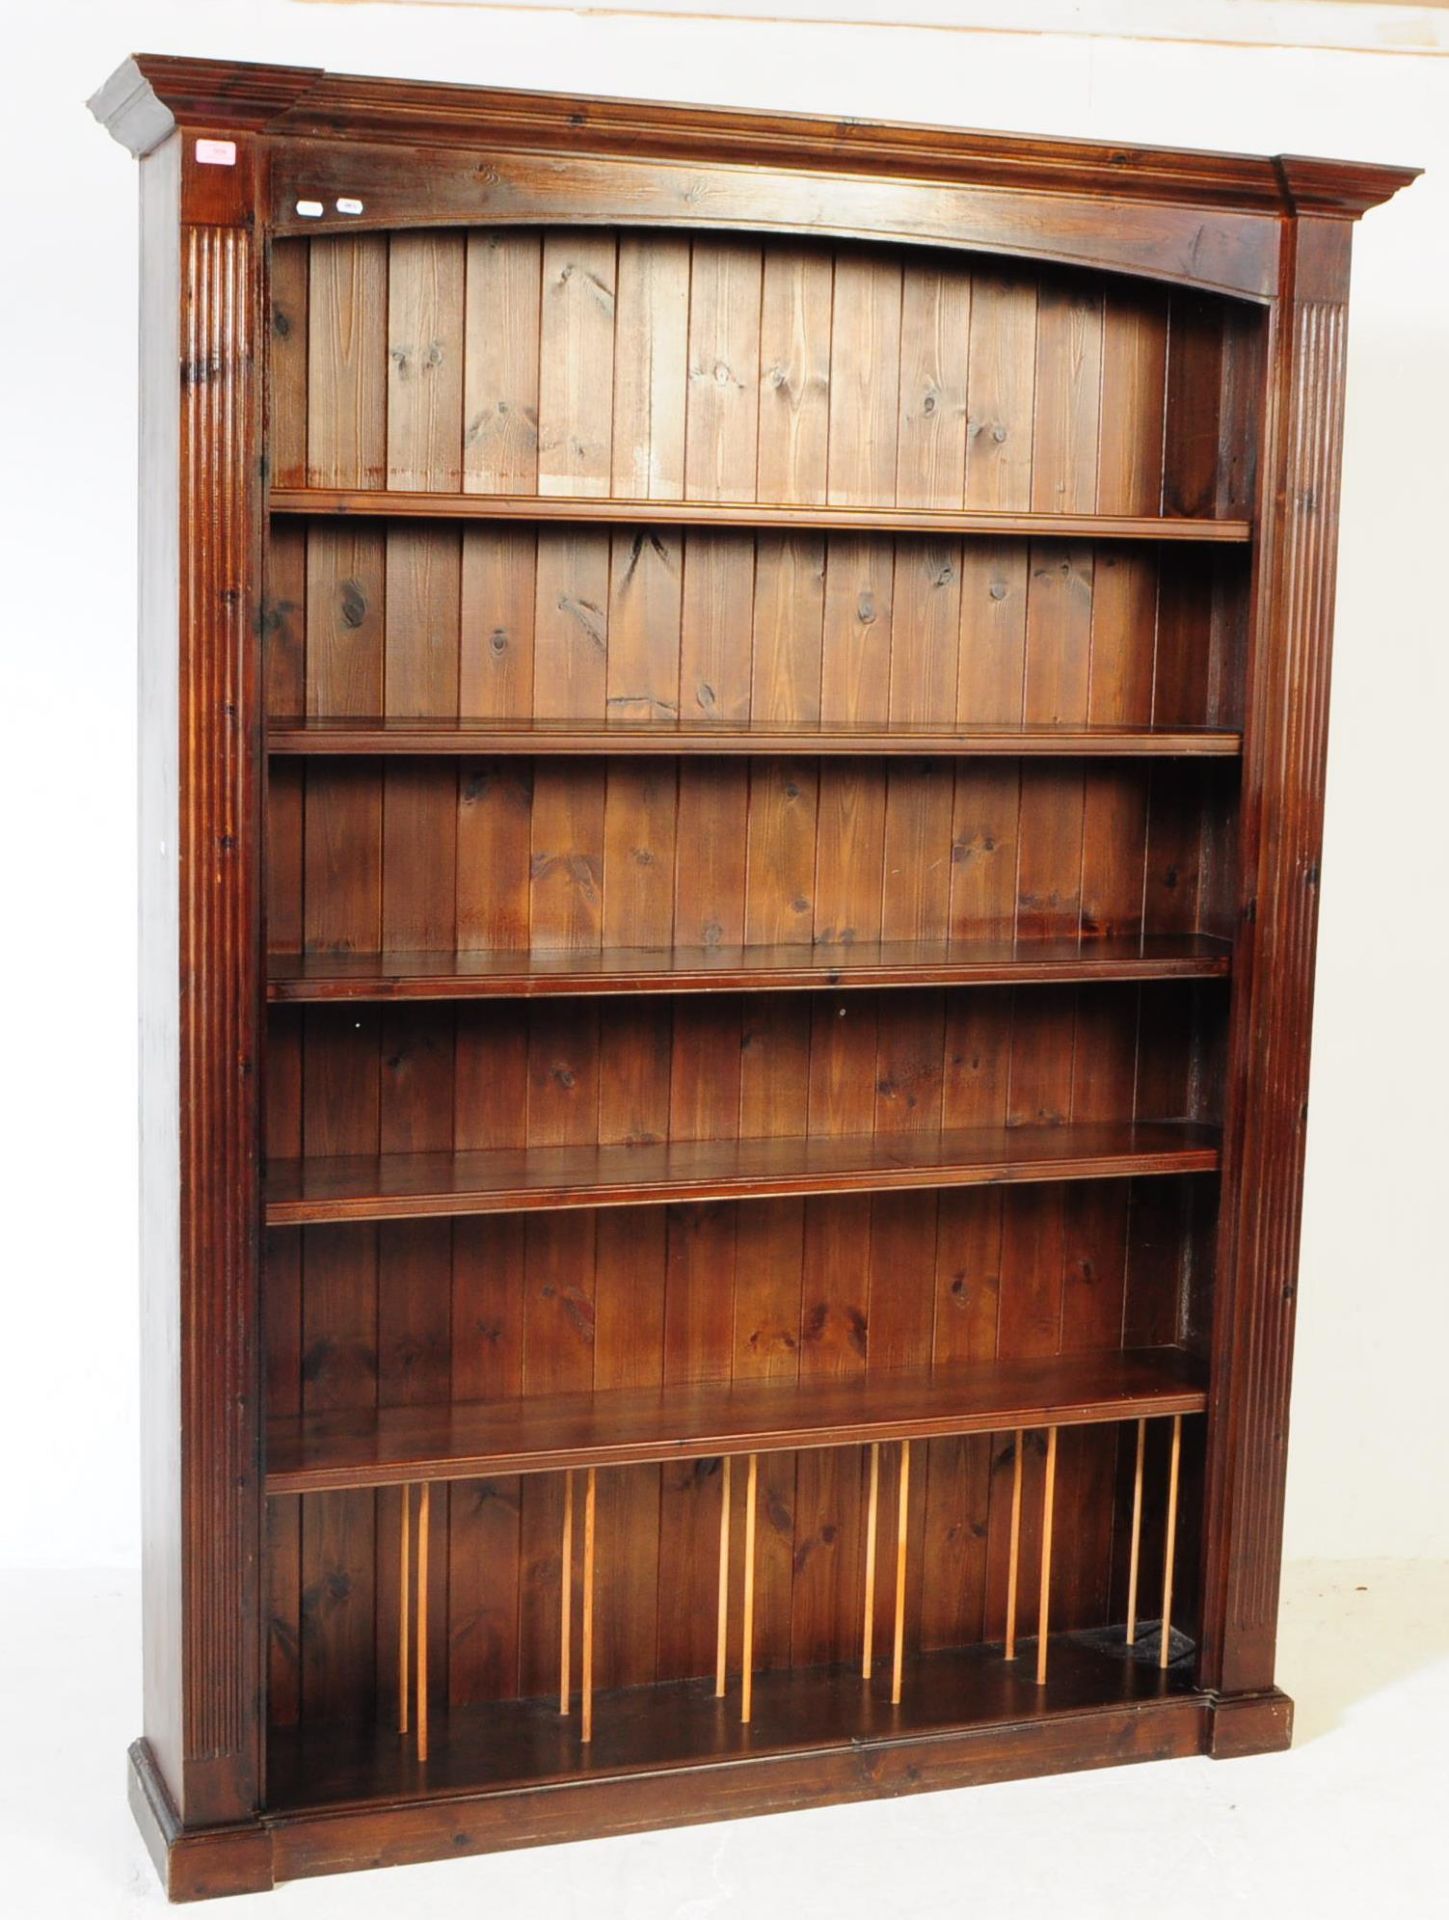 LARGE UPRIGHT VICTORIAN STYLE OPEN FRONT BOOKCASE